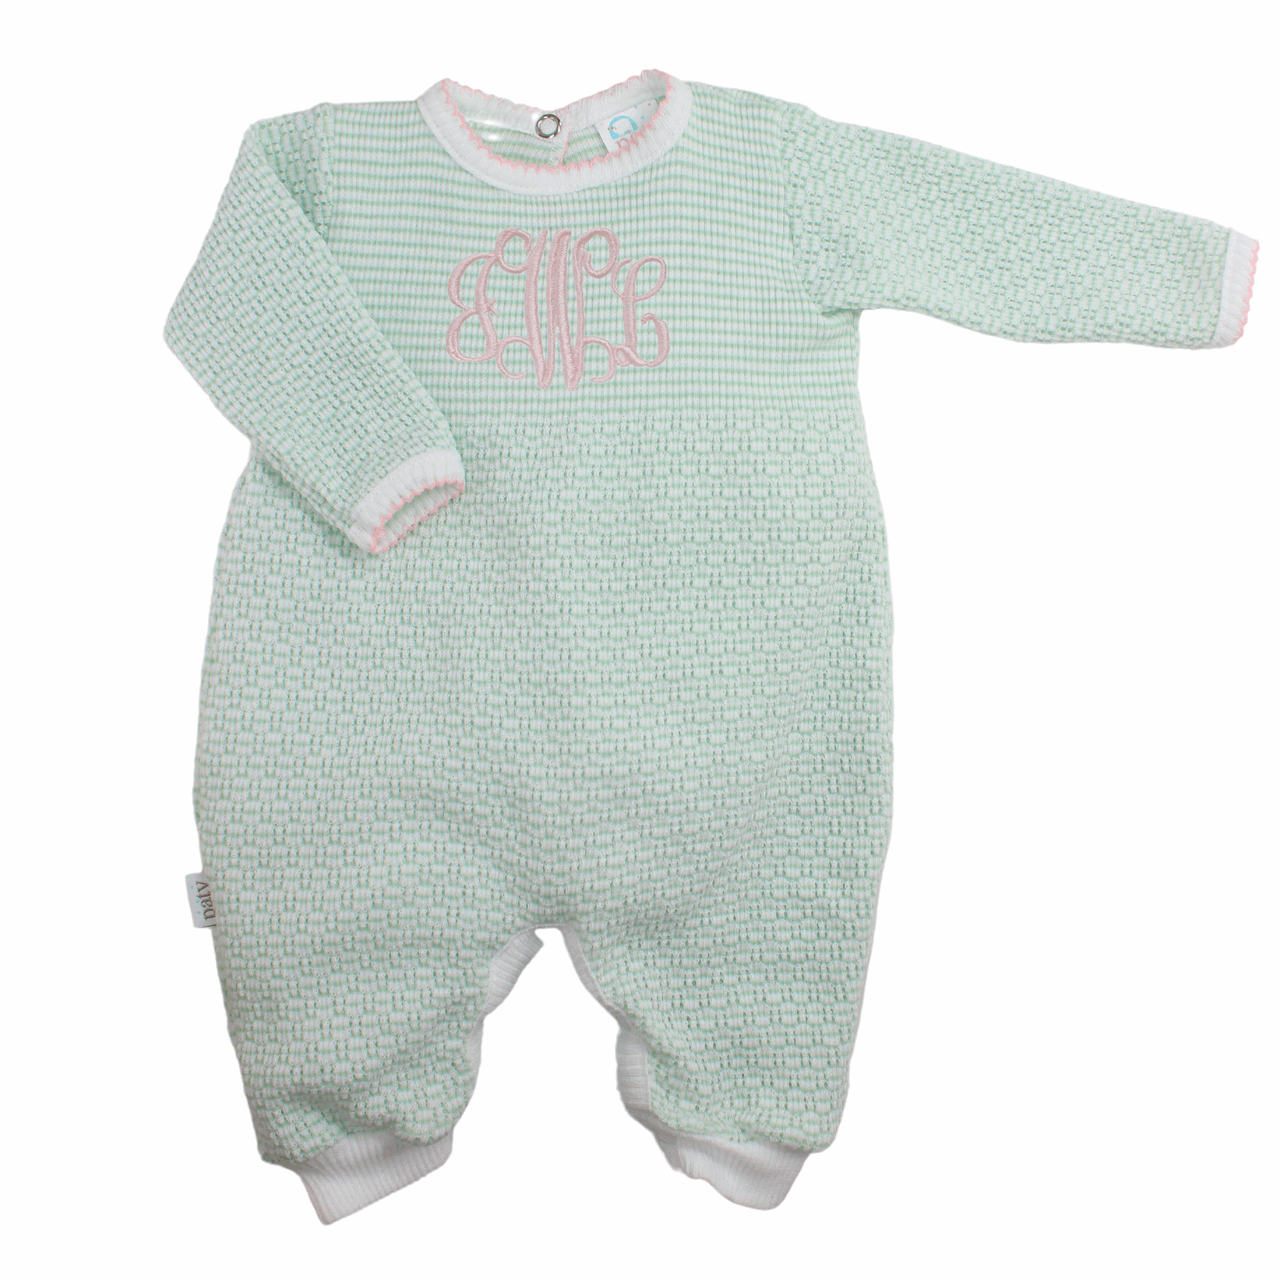 Baby Girl Romper Mint Green & Pink Coming Home Outfit